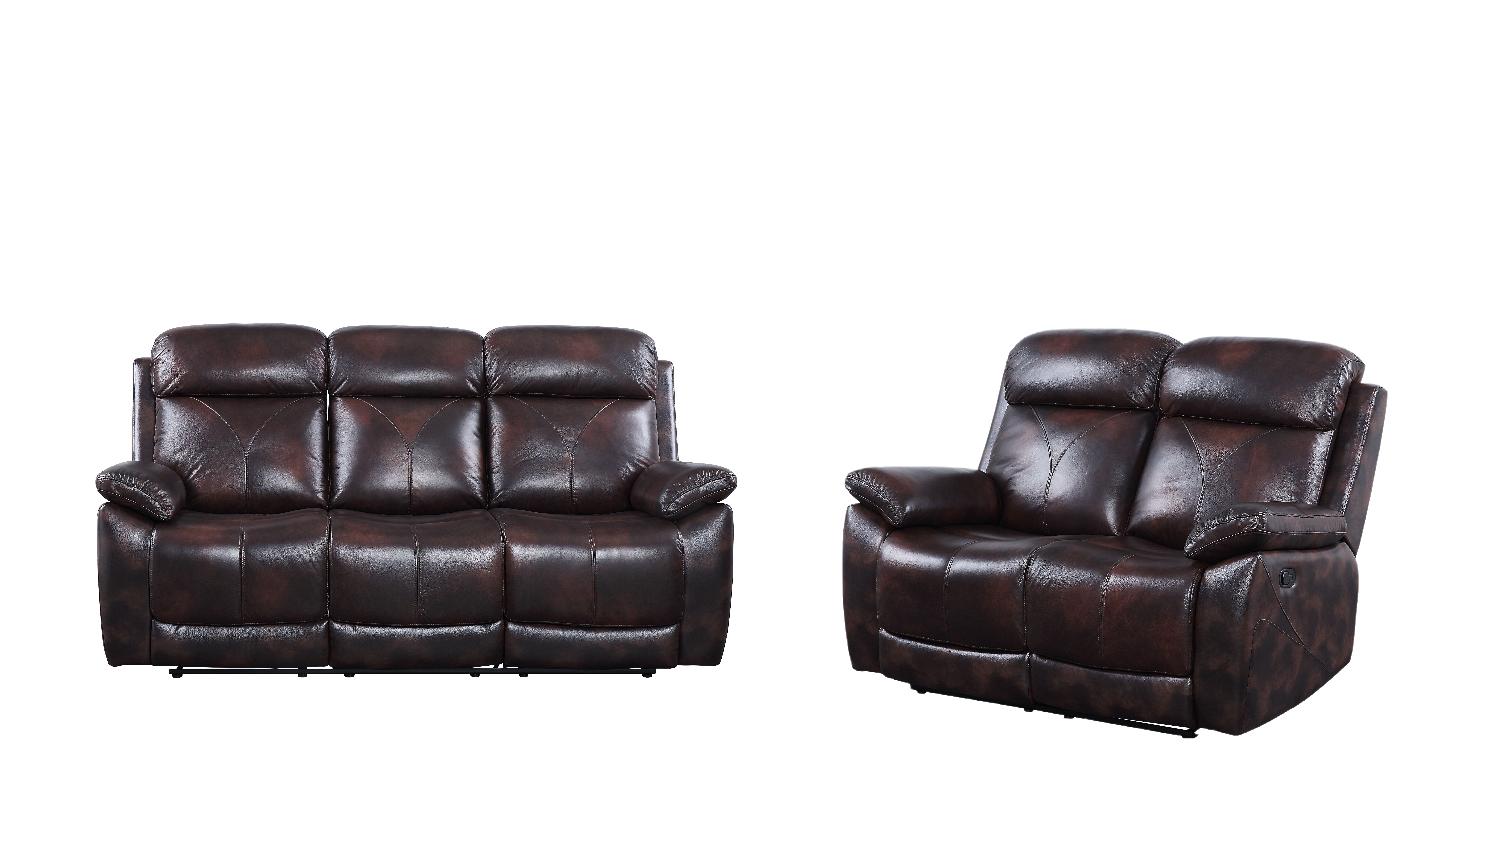 Contemporary Sofa and Loveseat Set Perfiel LV00066-2pcs in Dark Brown Leather